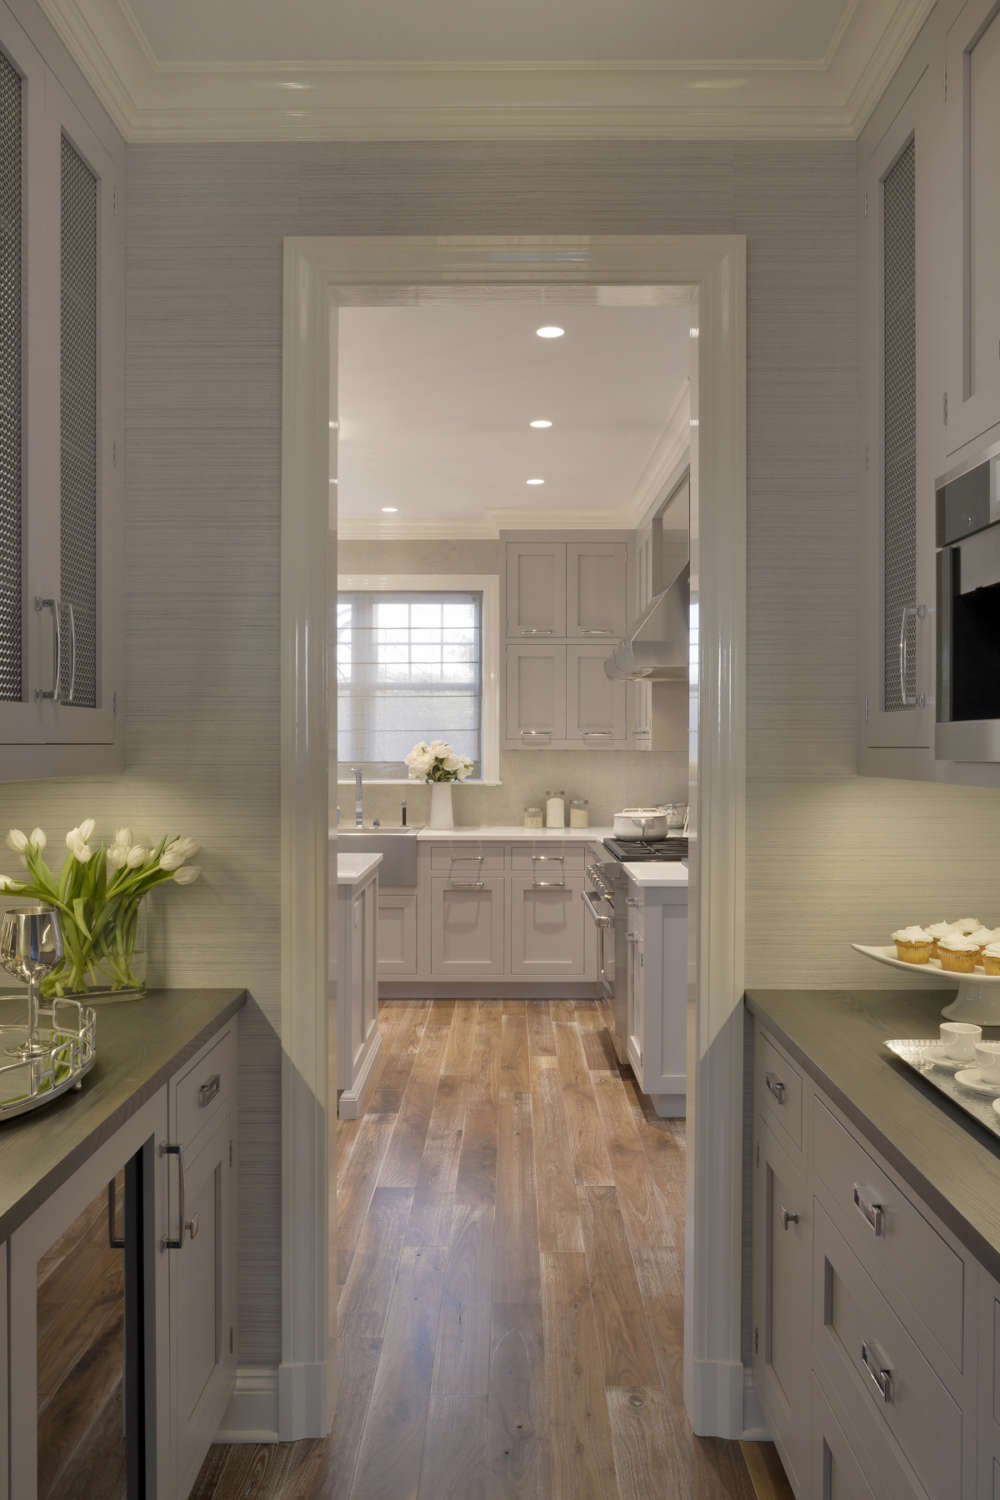 Butler's pantry features light grey painted shaker style Biotta cabinetry with metal door inserts, grey walls and espresso countertops. Pantry opens into an expansive kitchen. Design by Randy O'Kane, CKD, of Bilotta kitchens.